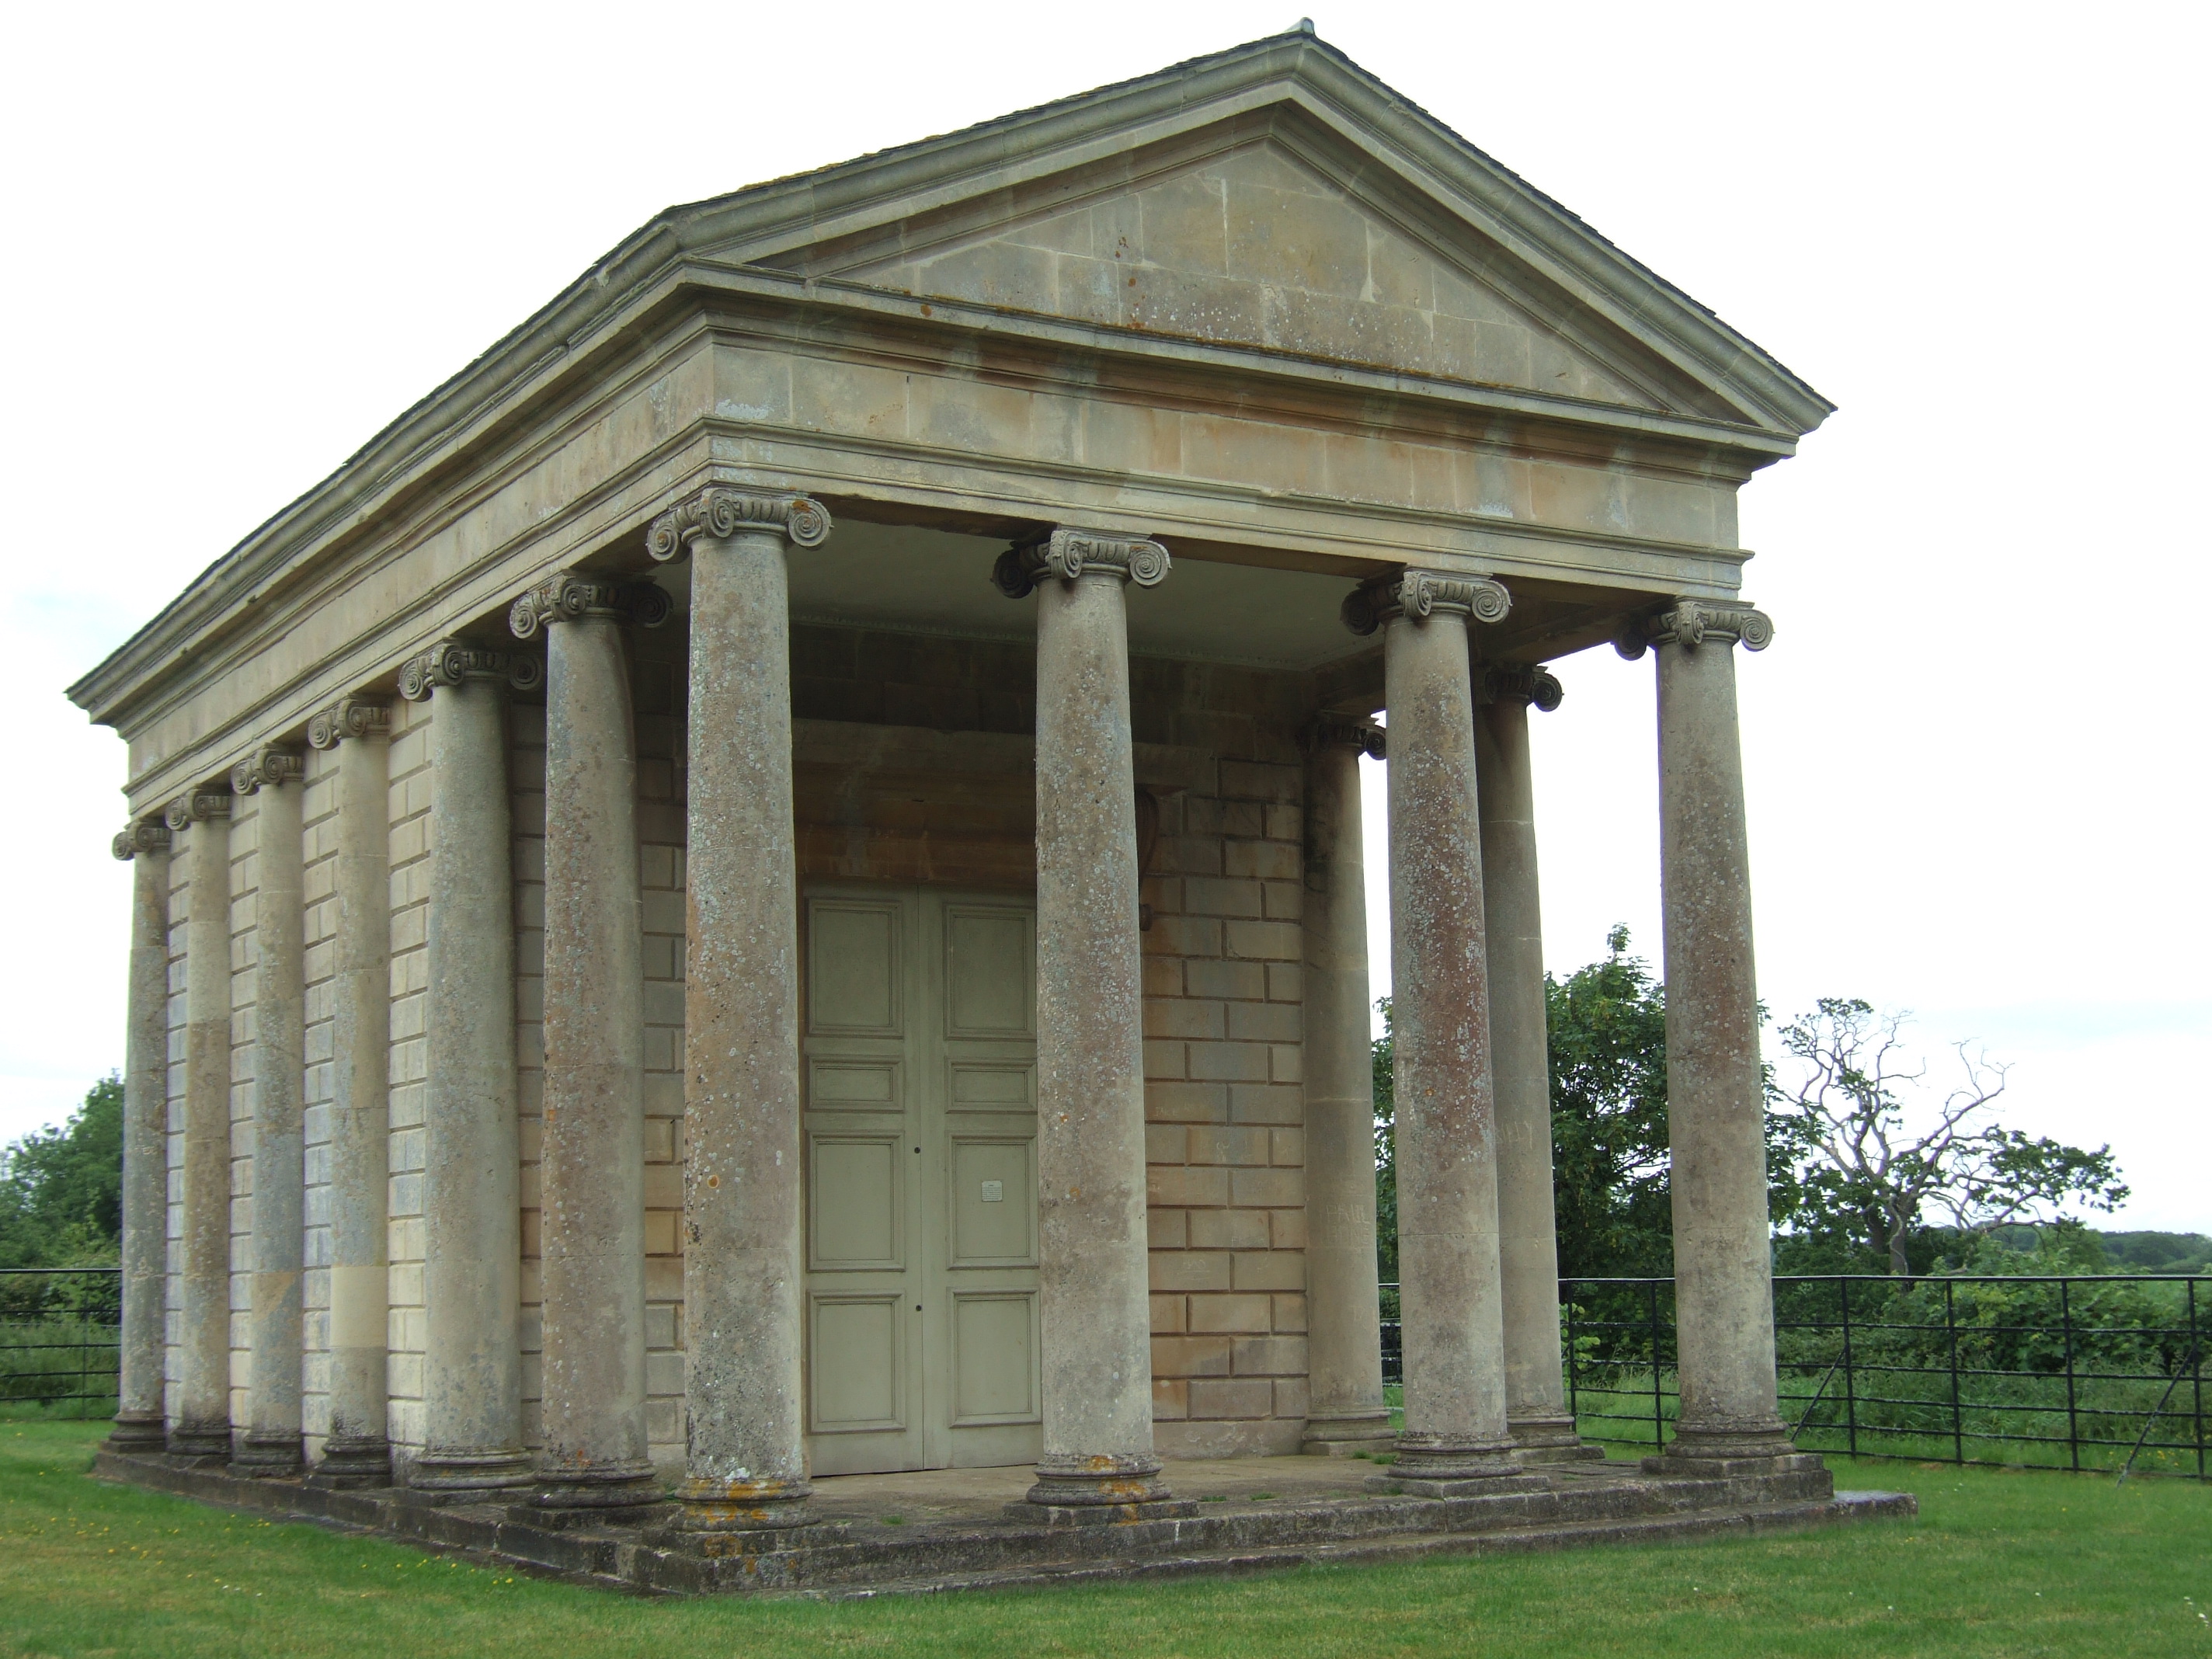 File:1 Temple of Harmony SE facade and portico 2.JPG - Wikimedia Commons